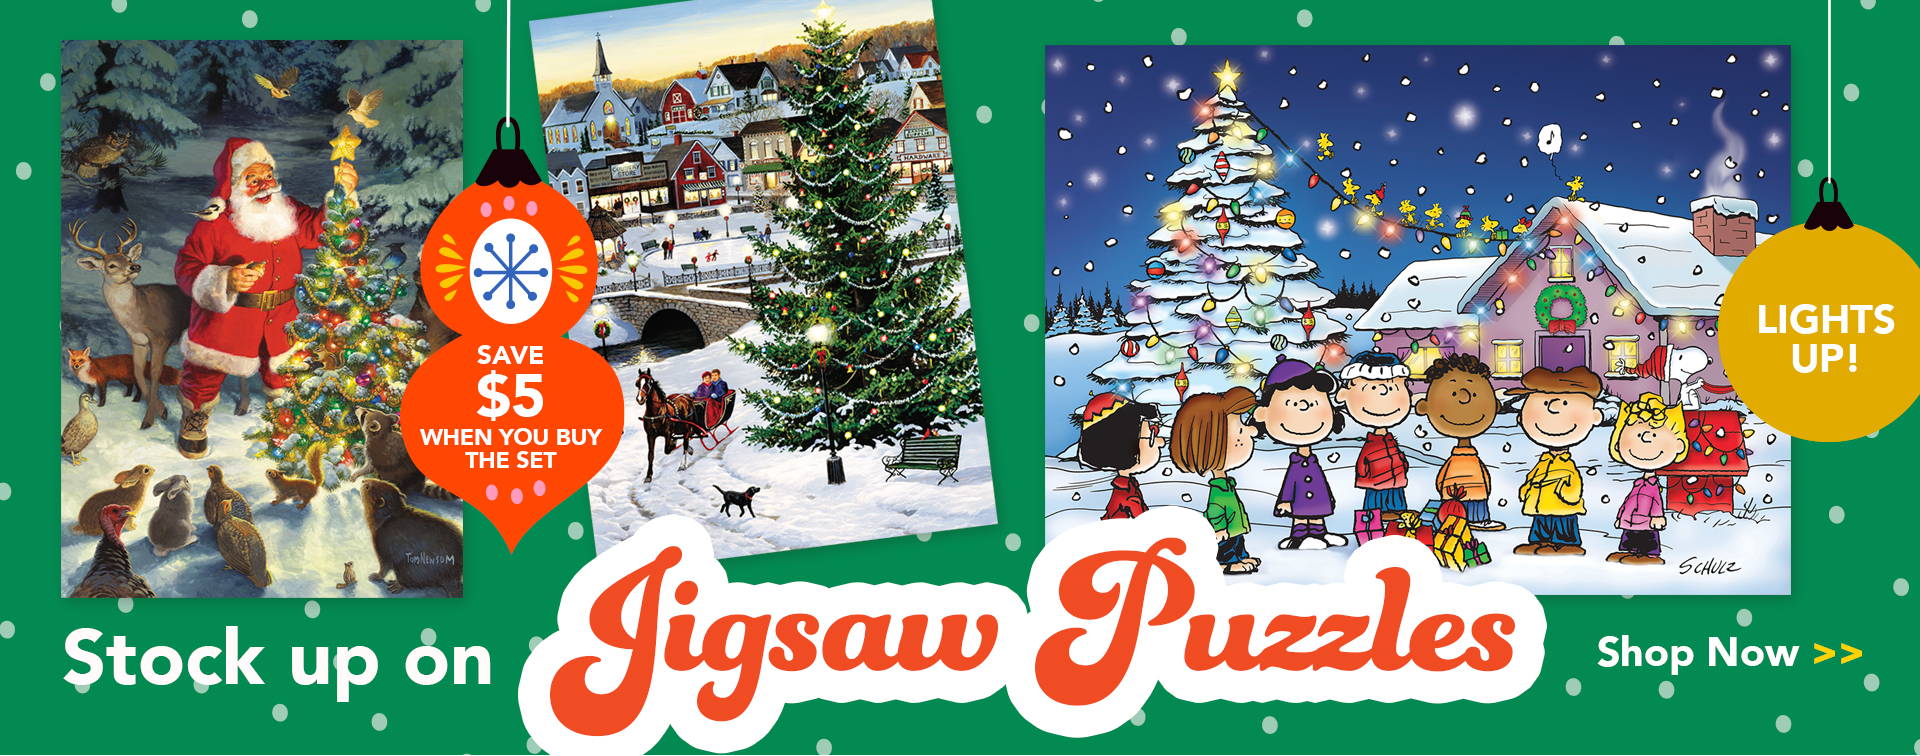 Stock up on Jigsaw puzzles